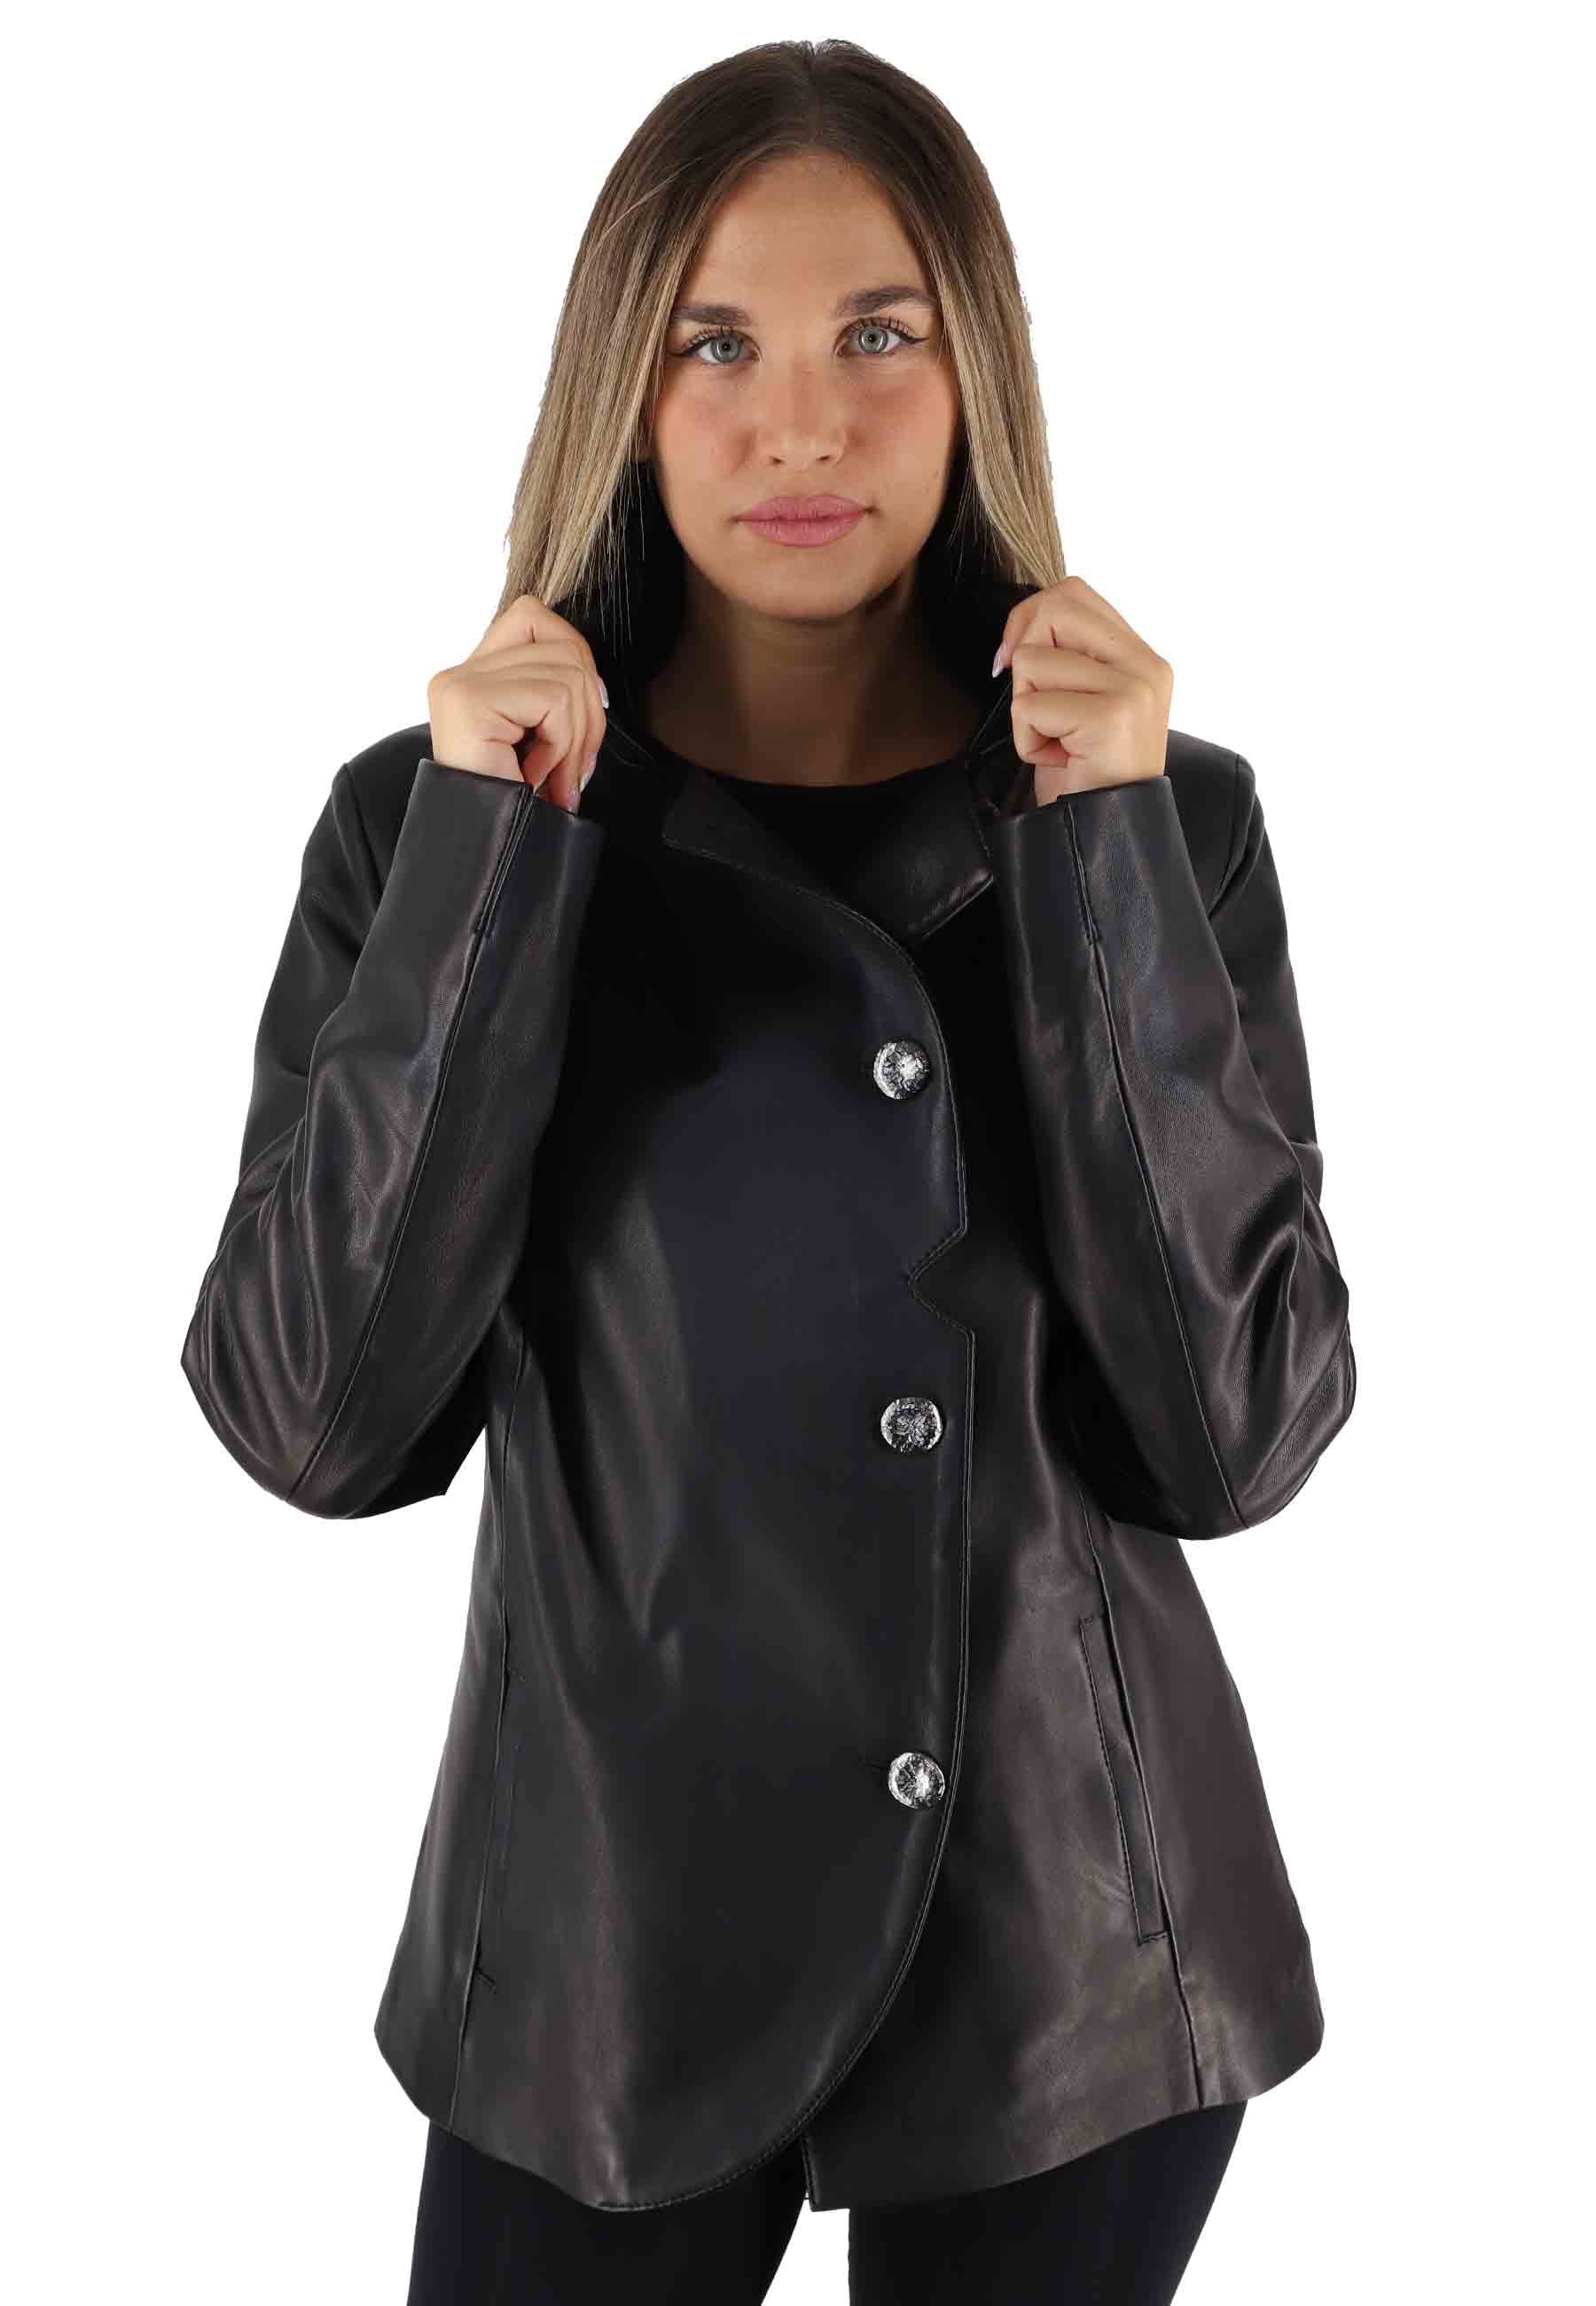 Single-breasted women's black leather jacket with jewel buttons